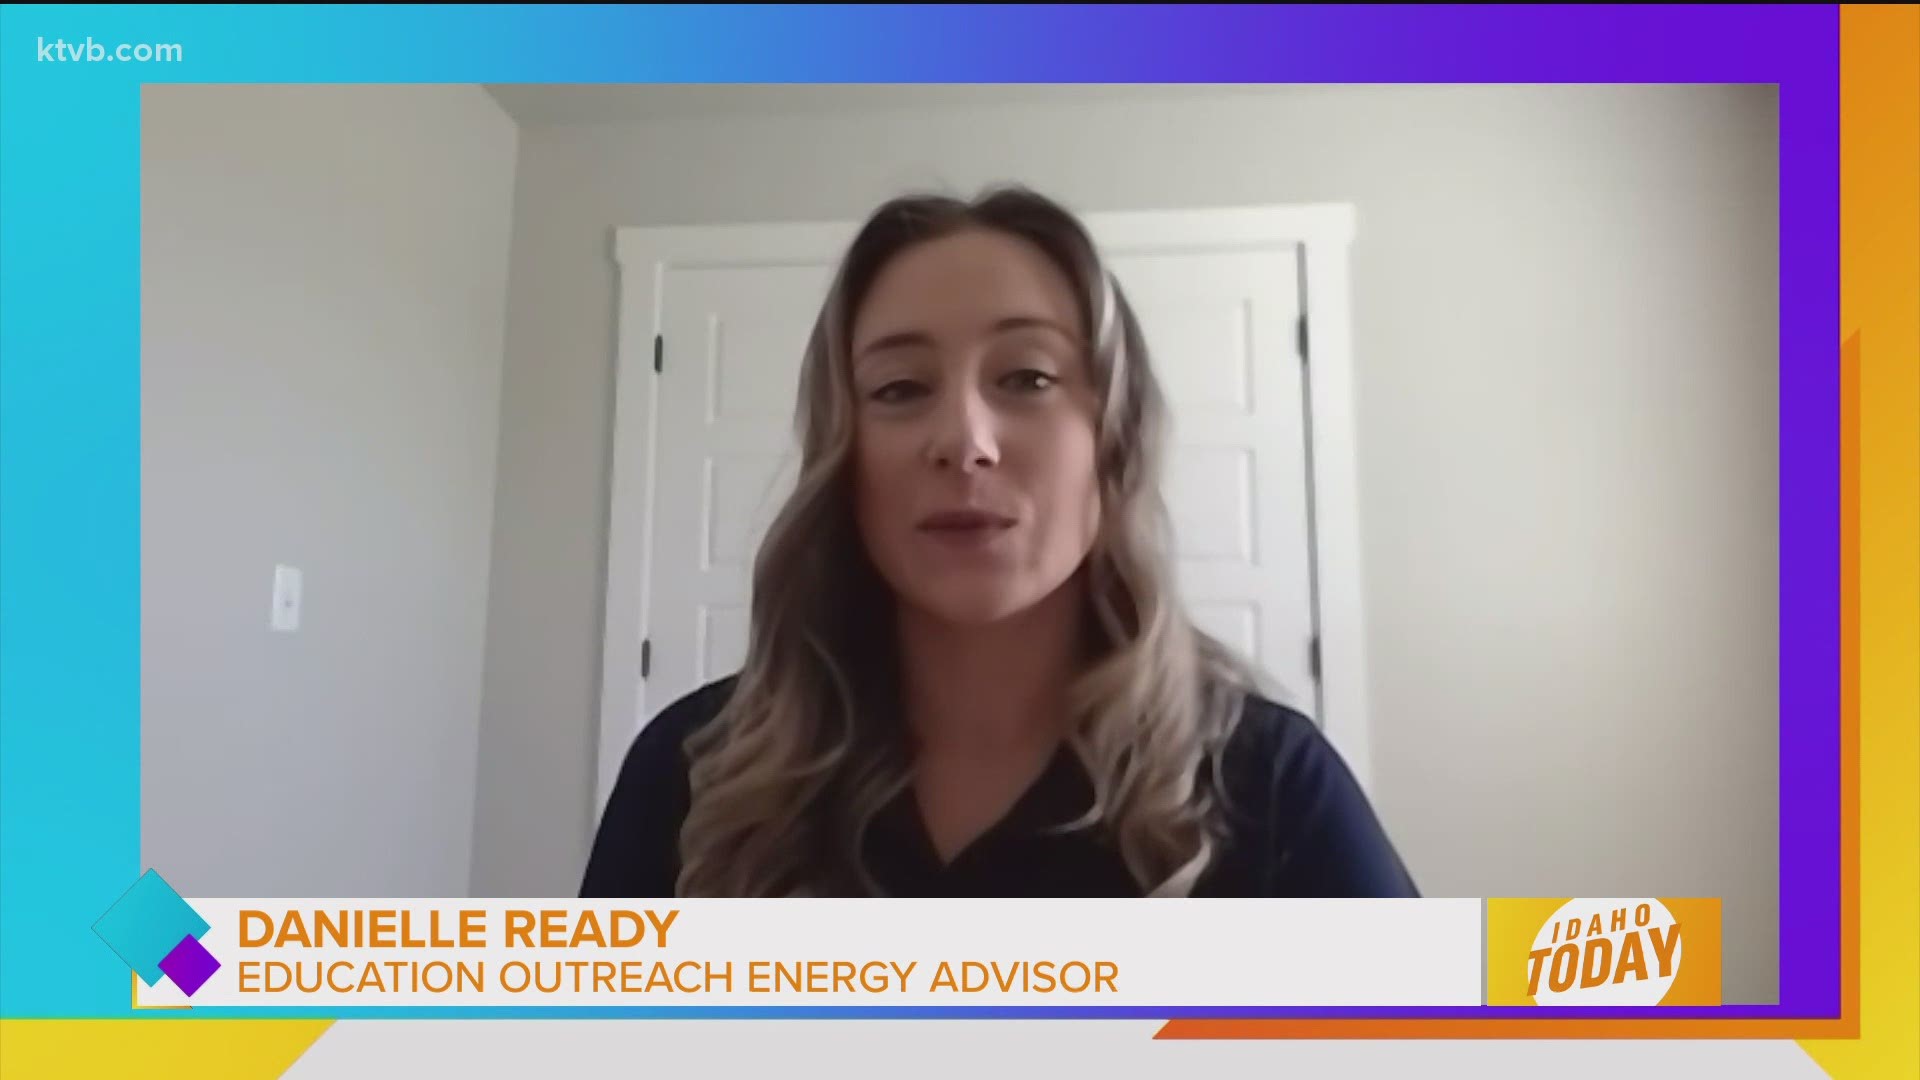 Danielle Ready, Education Outreach Energy Advisor gives tips on how to prepare for a power outages. Visit https://www.idahopower.com/outages-safety/